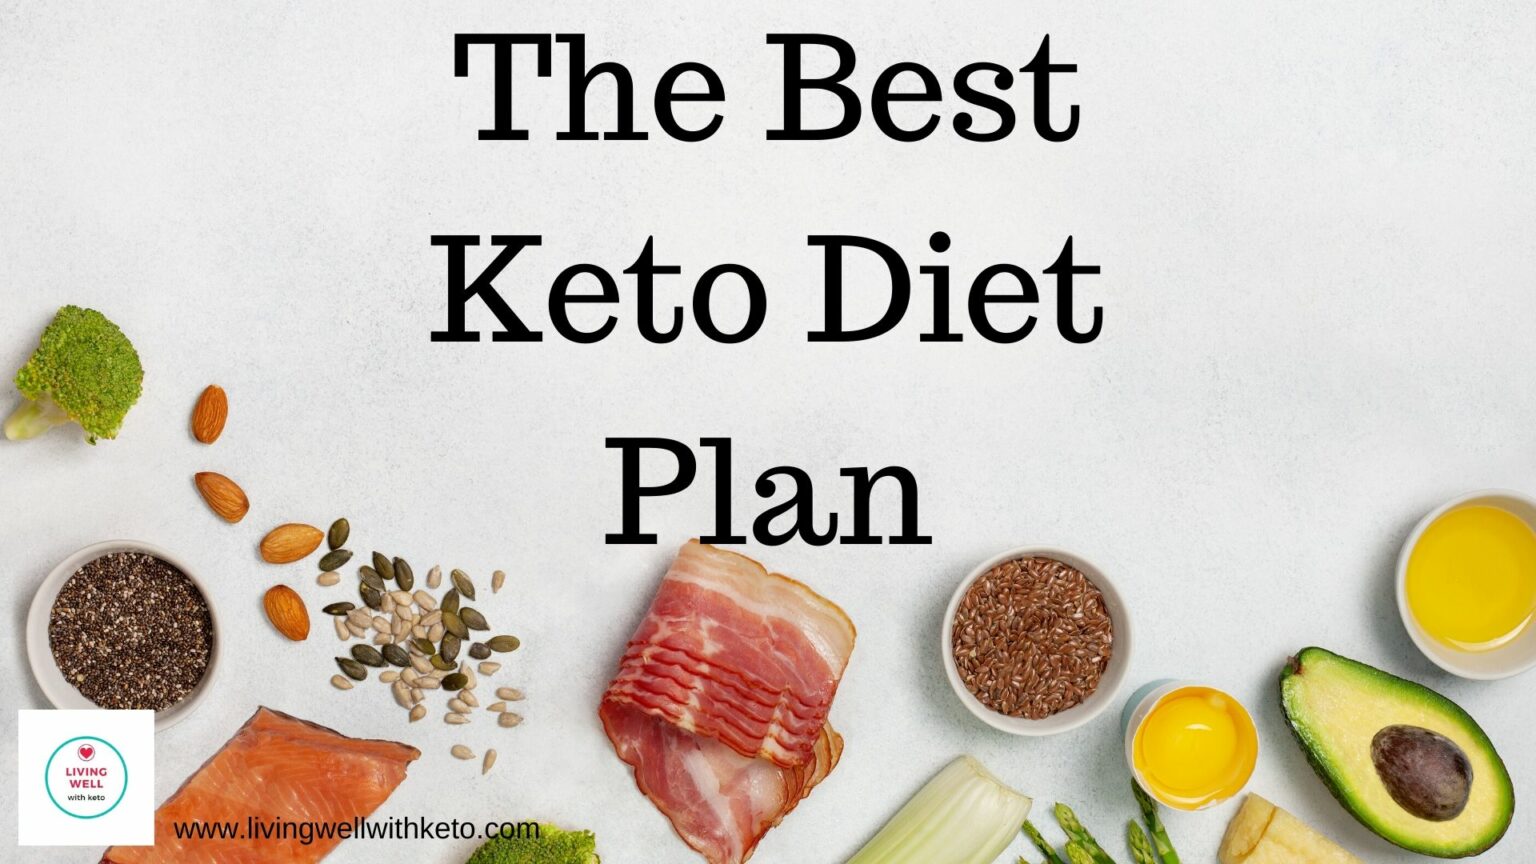 The Best Keto Diet Plan – Living Well With Keto